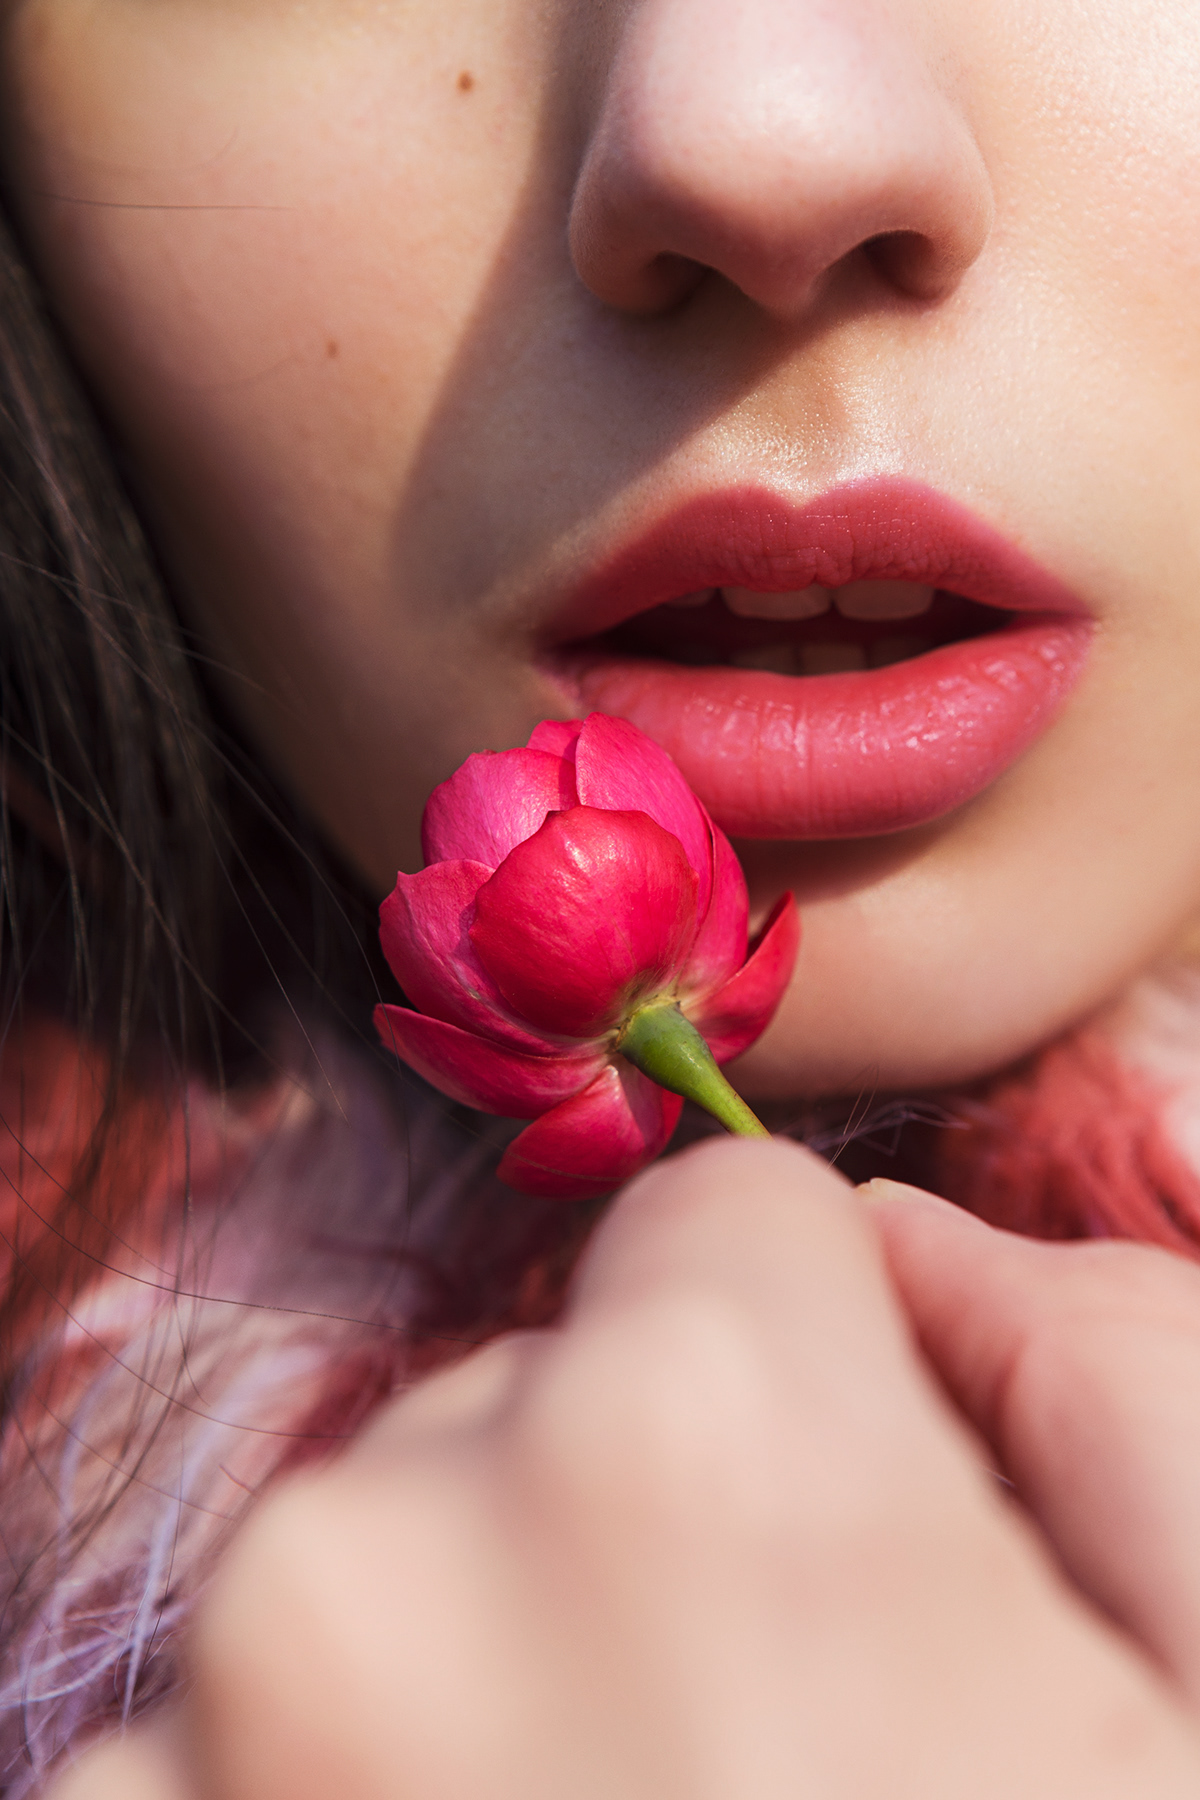 autumn Flowers makeup urbanphotography milano fashionphotography portrait styling  pink RITRATTO